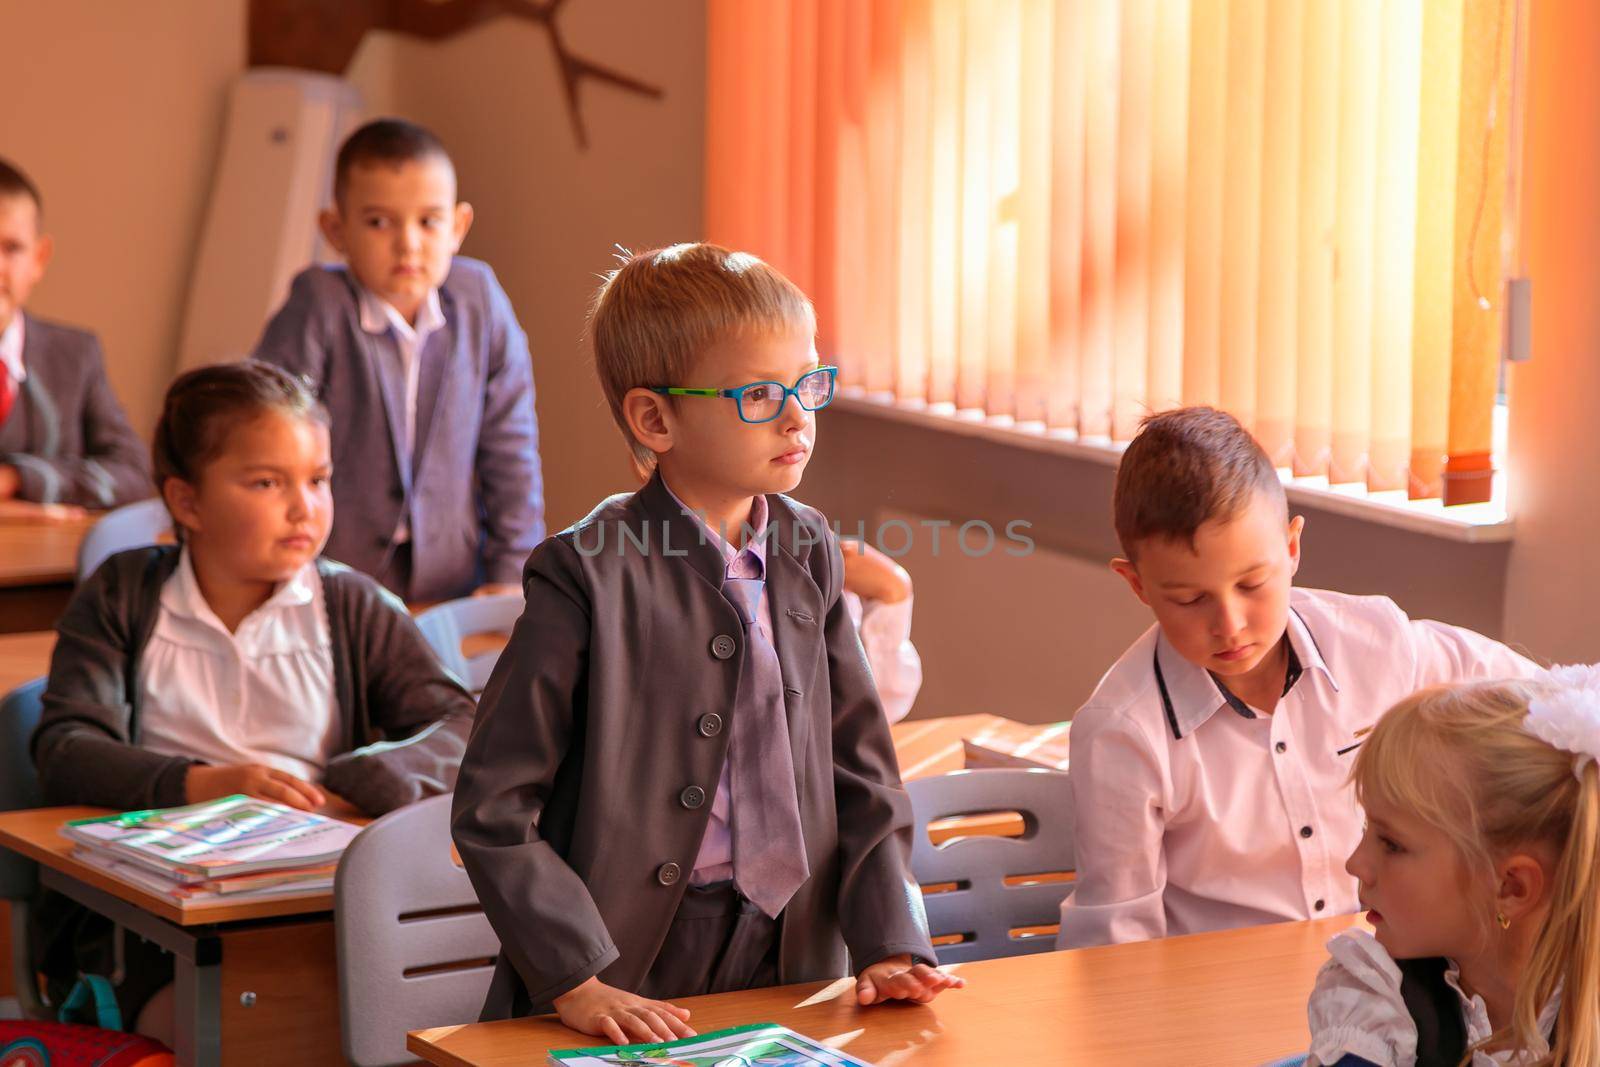 The first grader stands at the desk and answers the teacher's question. Moscow, Russia, September 2, 2019